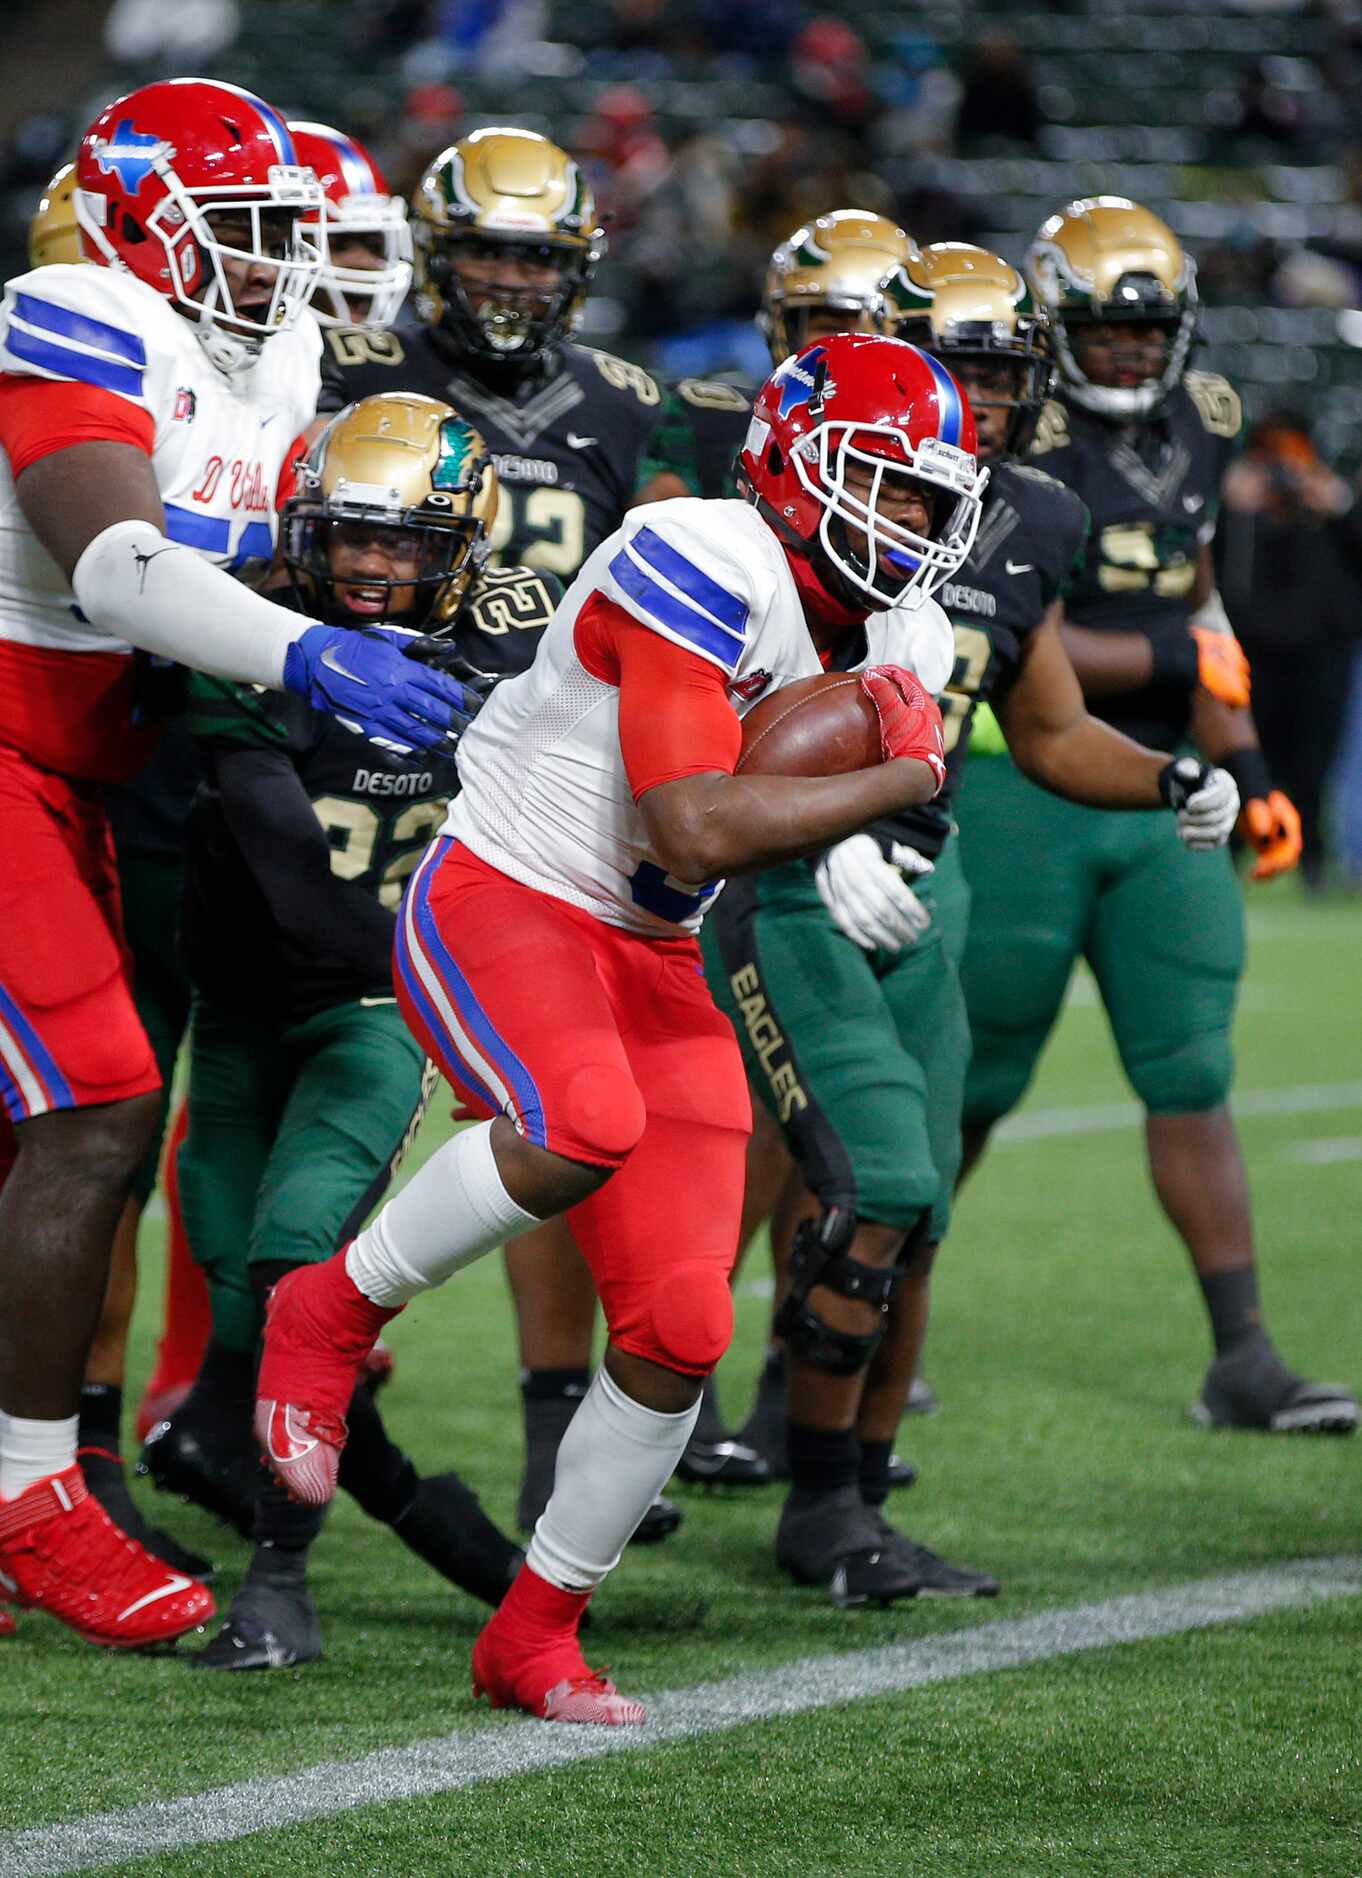 Duncanville junior running back Malachi Medlock scores a touchdown during the first half of...